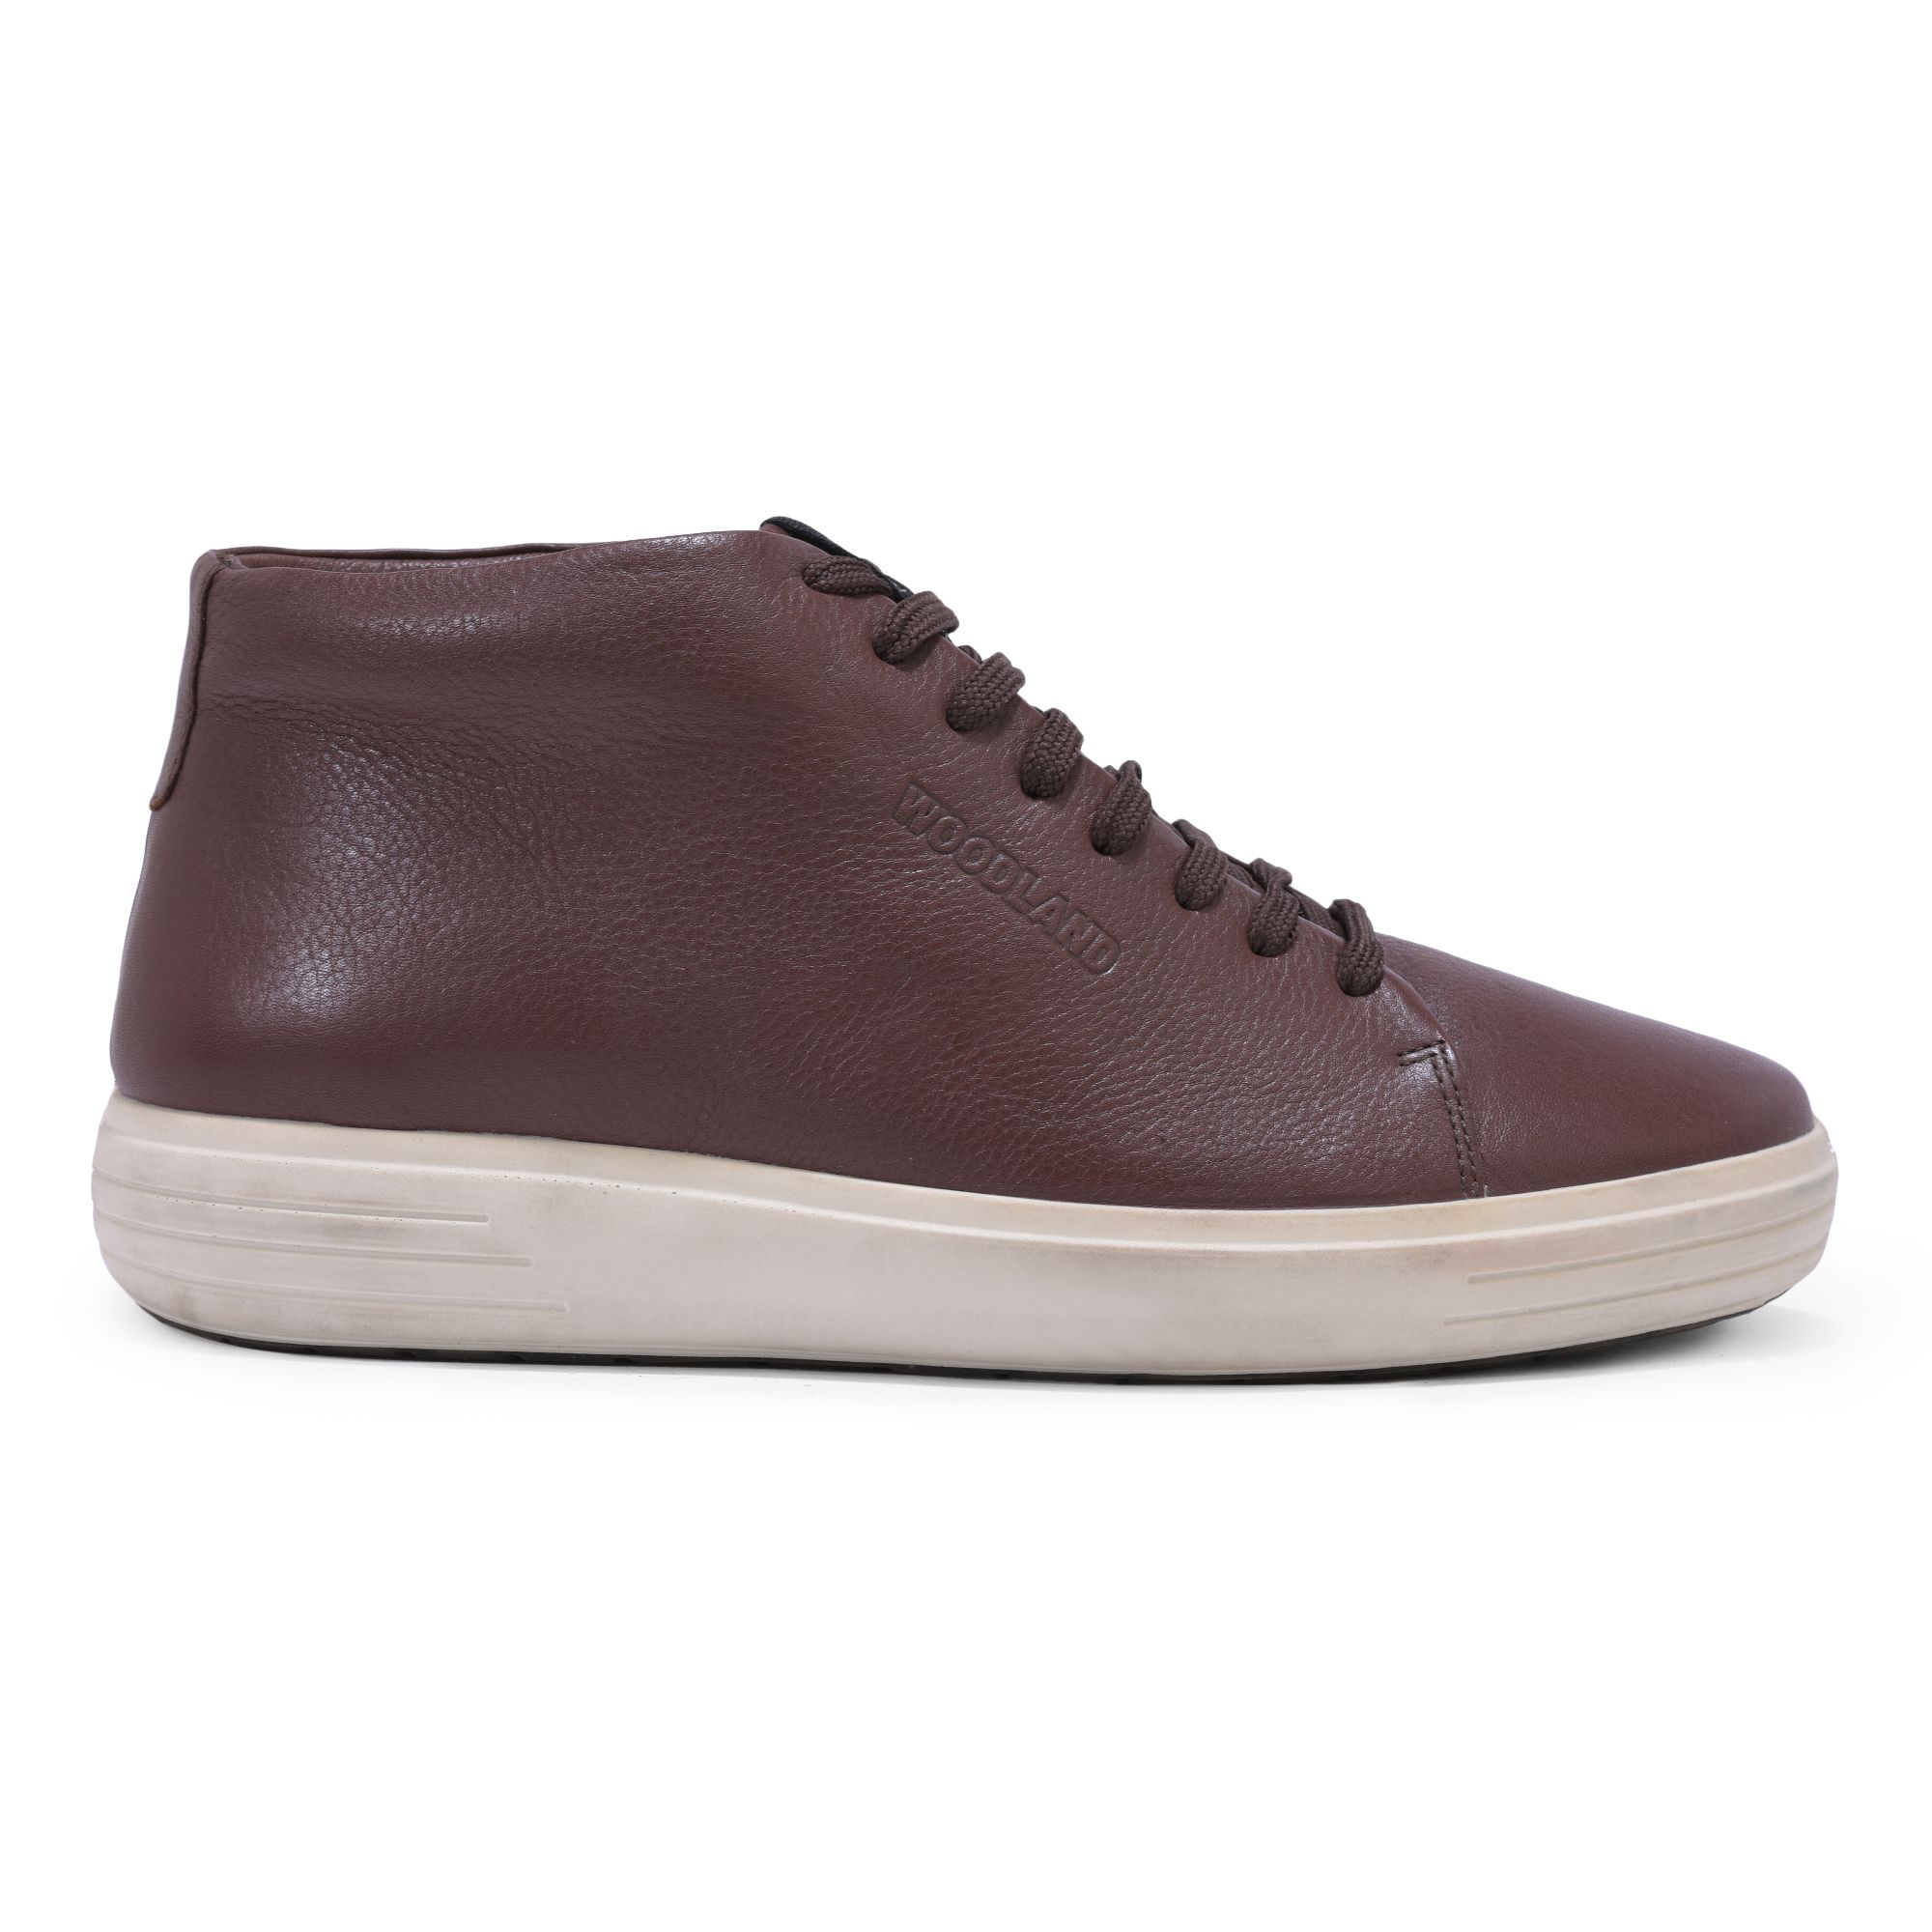 Woodland Men Camel Brown Nubuck Leather Sneakers - Price History